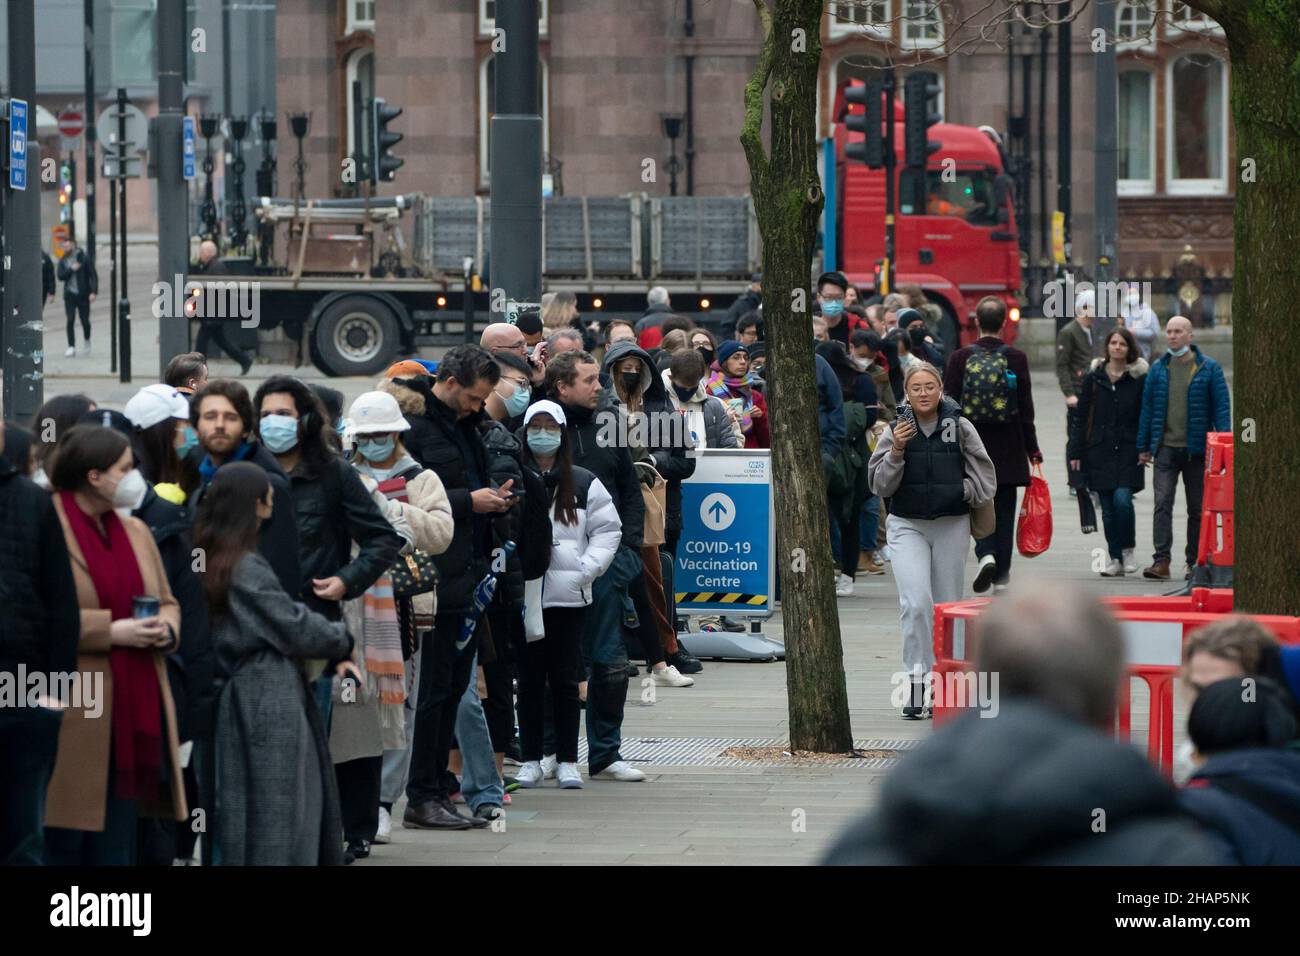 Manchester, UK, 14th December 2021. Members of thr public queue at a vaccination centre in central Manchester as fears grow that the Omicron variant will force the government into closing parts of the economy. Credit: Jon Super/Alamy Live News. Stock Photo